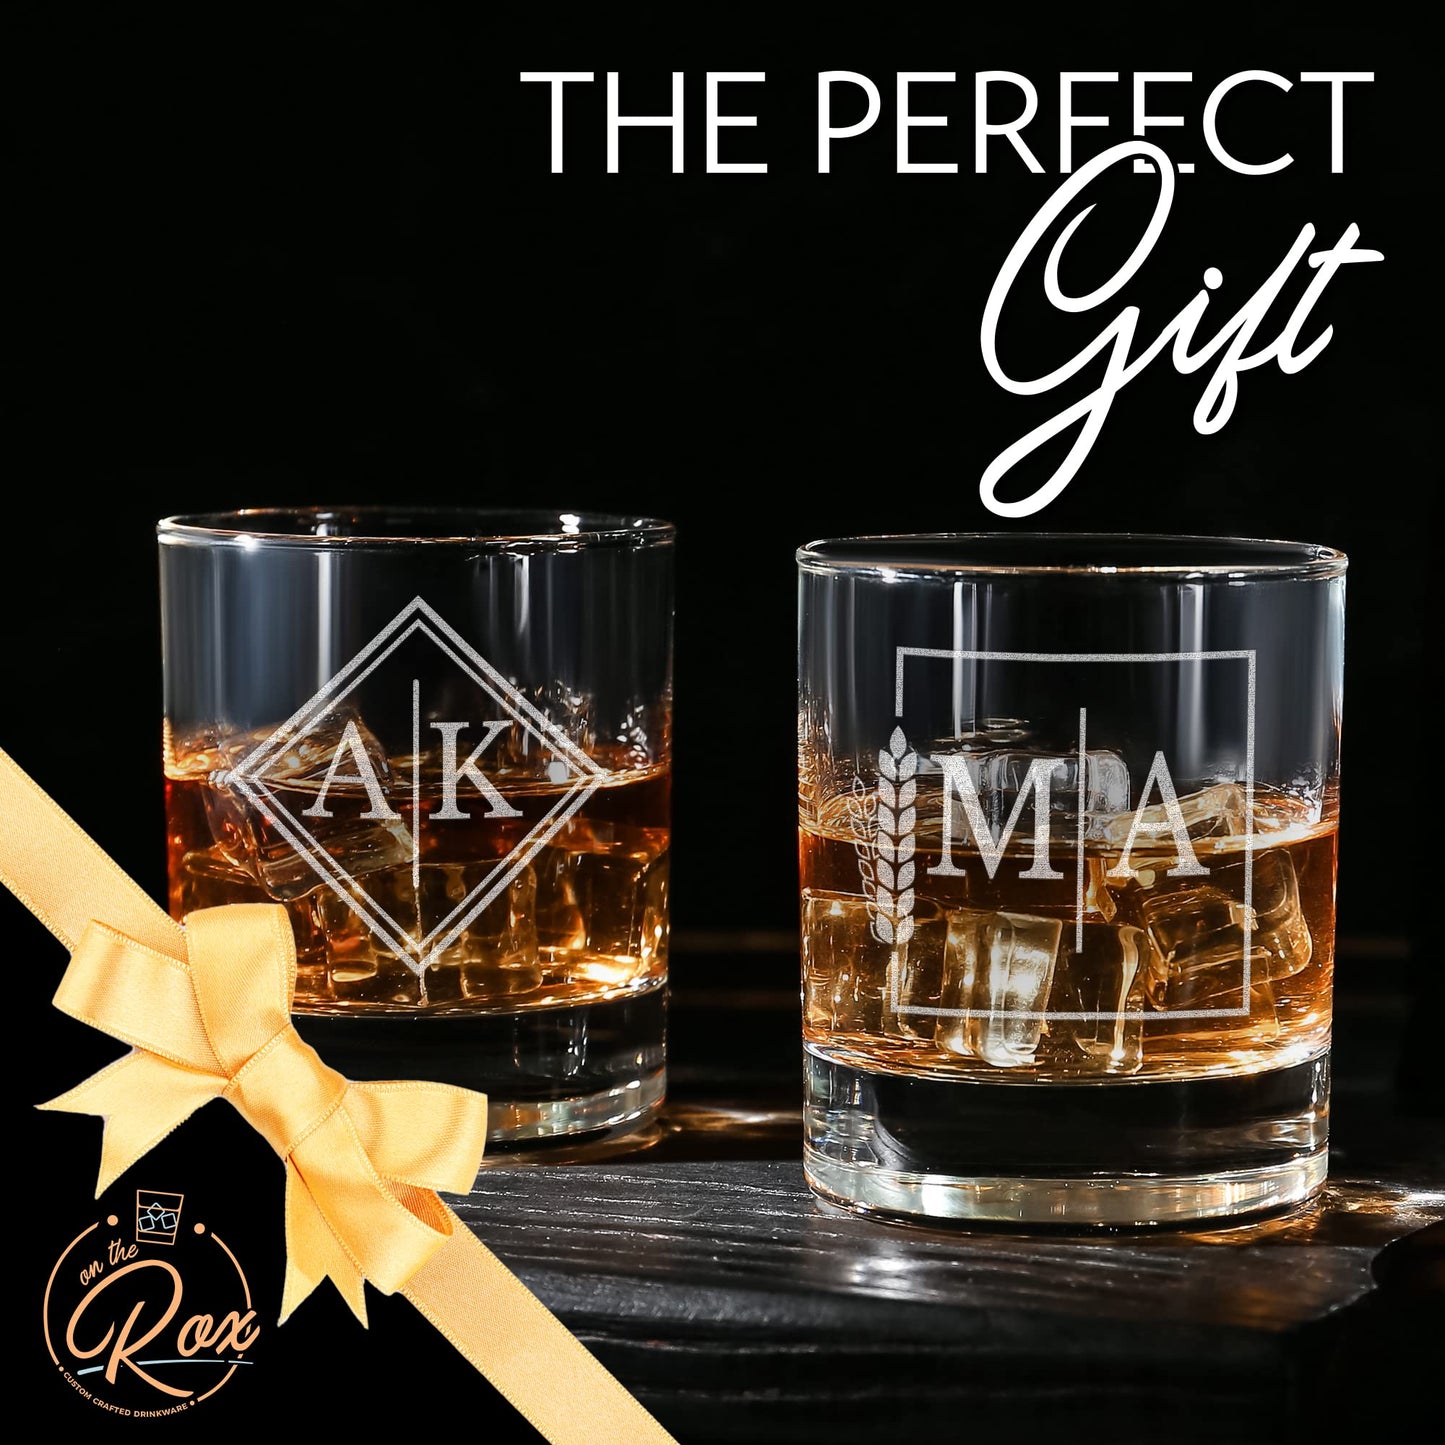 On The Rox Drinks Personalized Whiskey Gifts for Men - 11 oz Engraved Split Monogrammed Whiskey Glass Set of 2 - Customized Cocktail Glass - Bourbon, Scotch, Rocks, Brandy